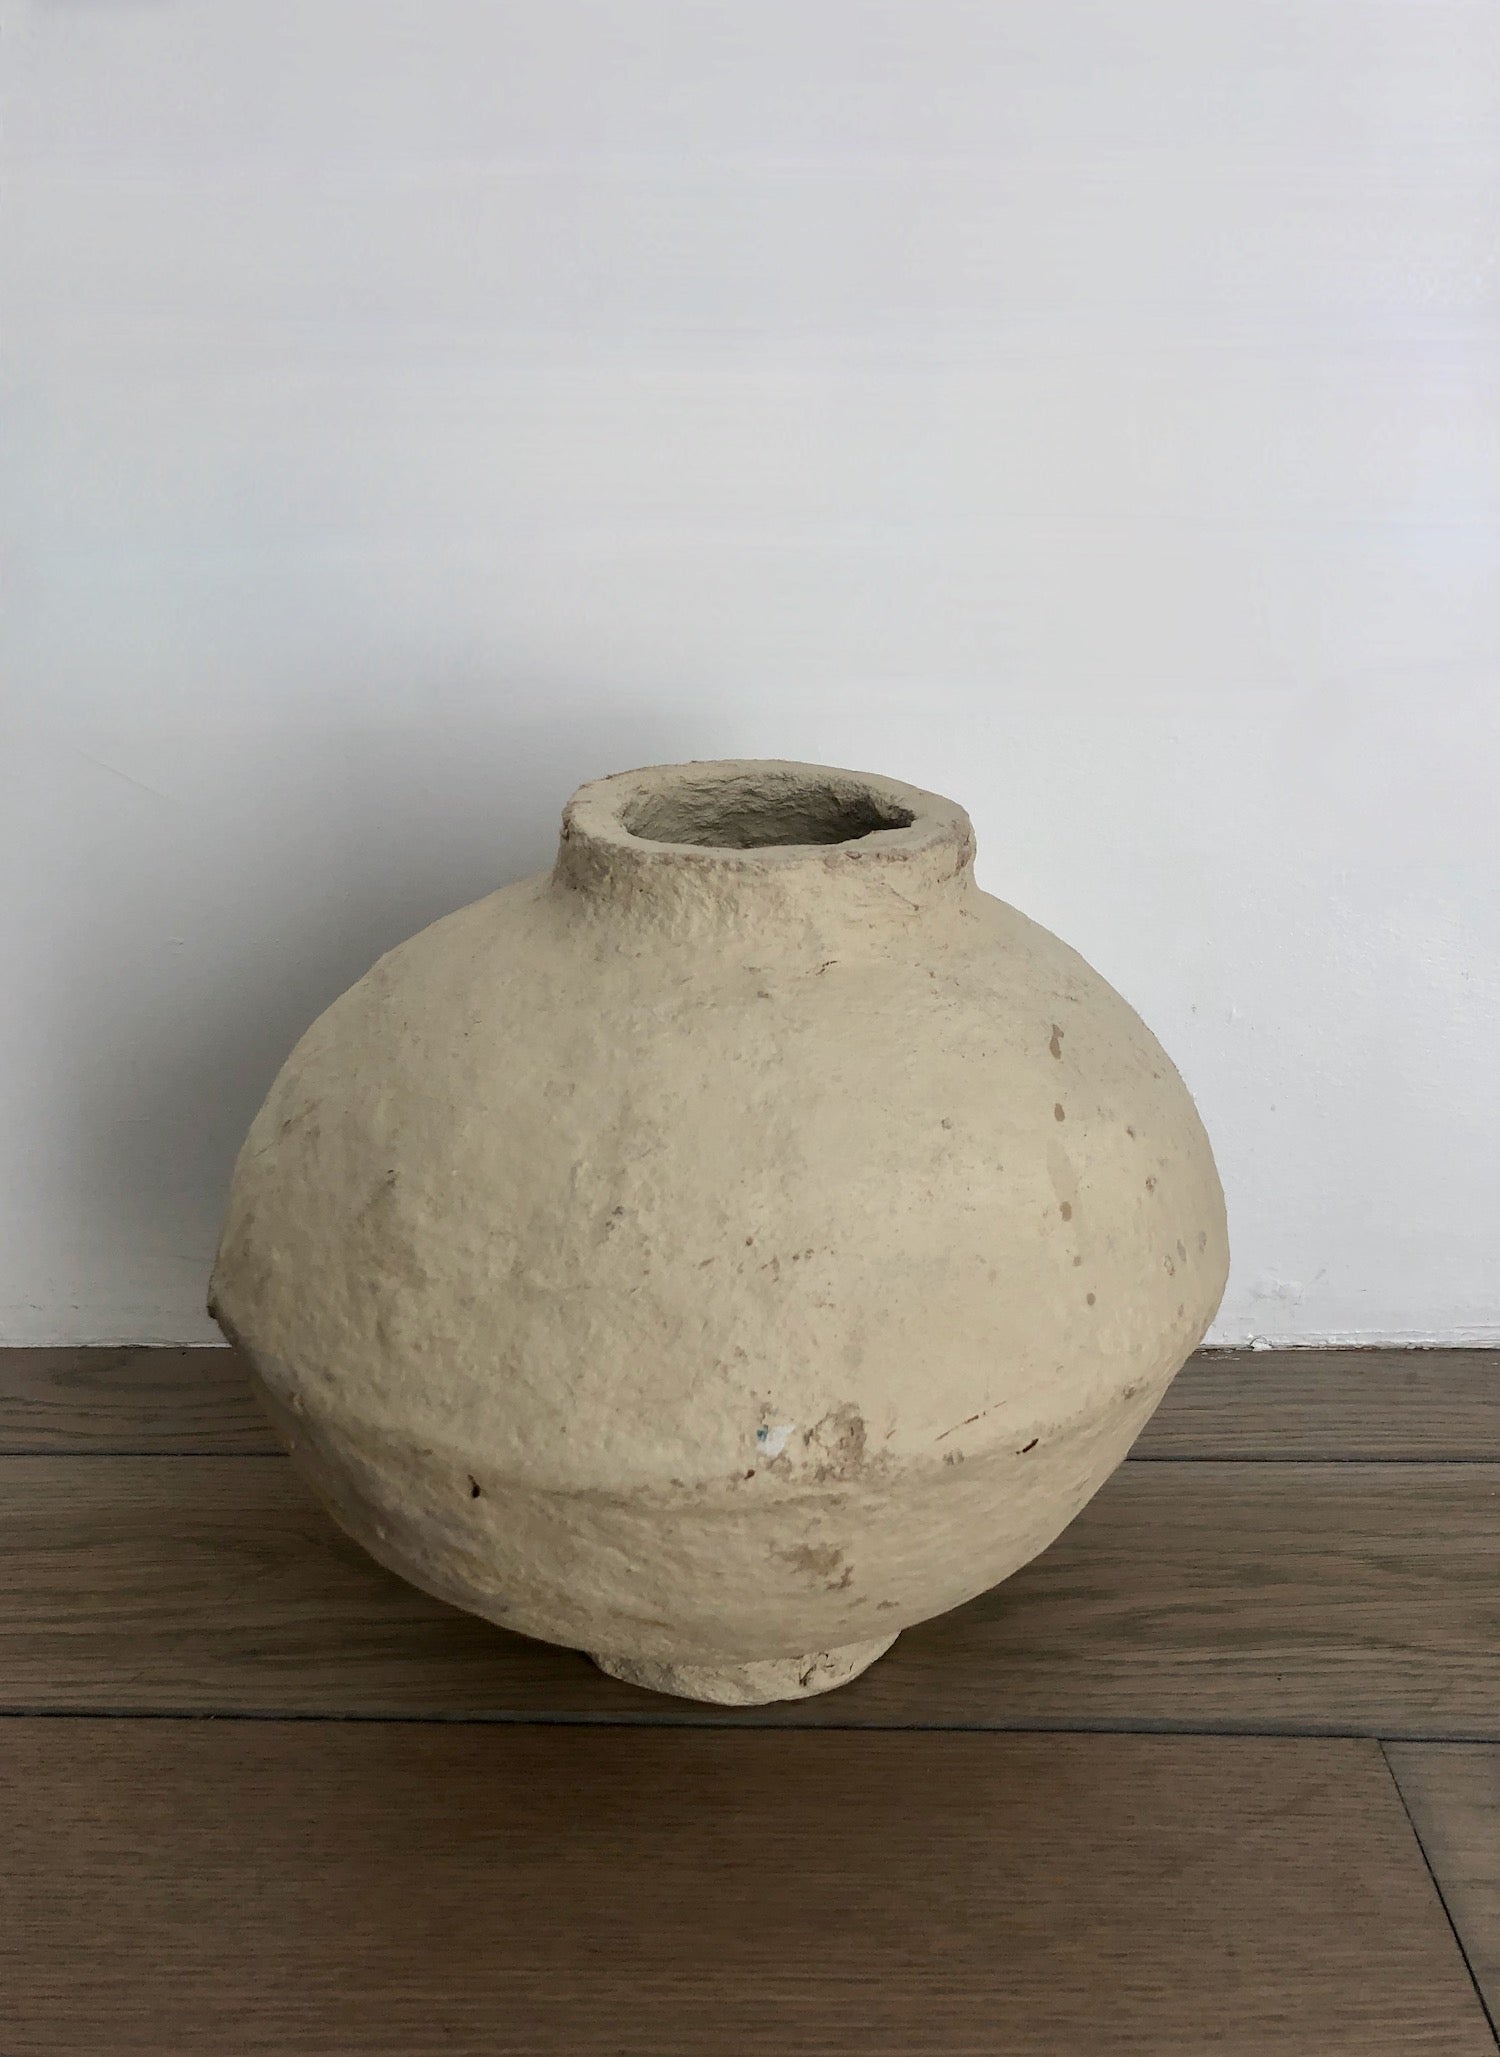 Hand crafted paper maché vessel with a wide, round bodice and distinctive tapered rim in a natural cream color.